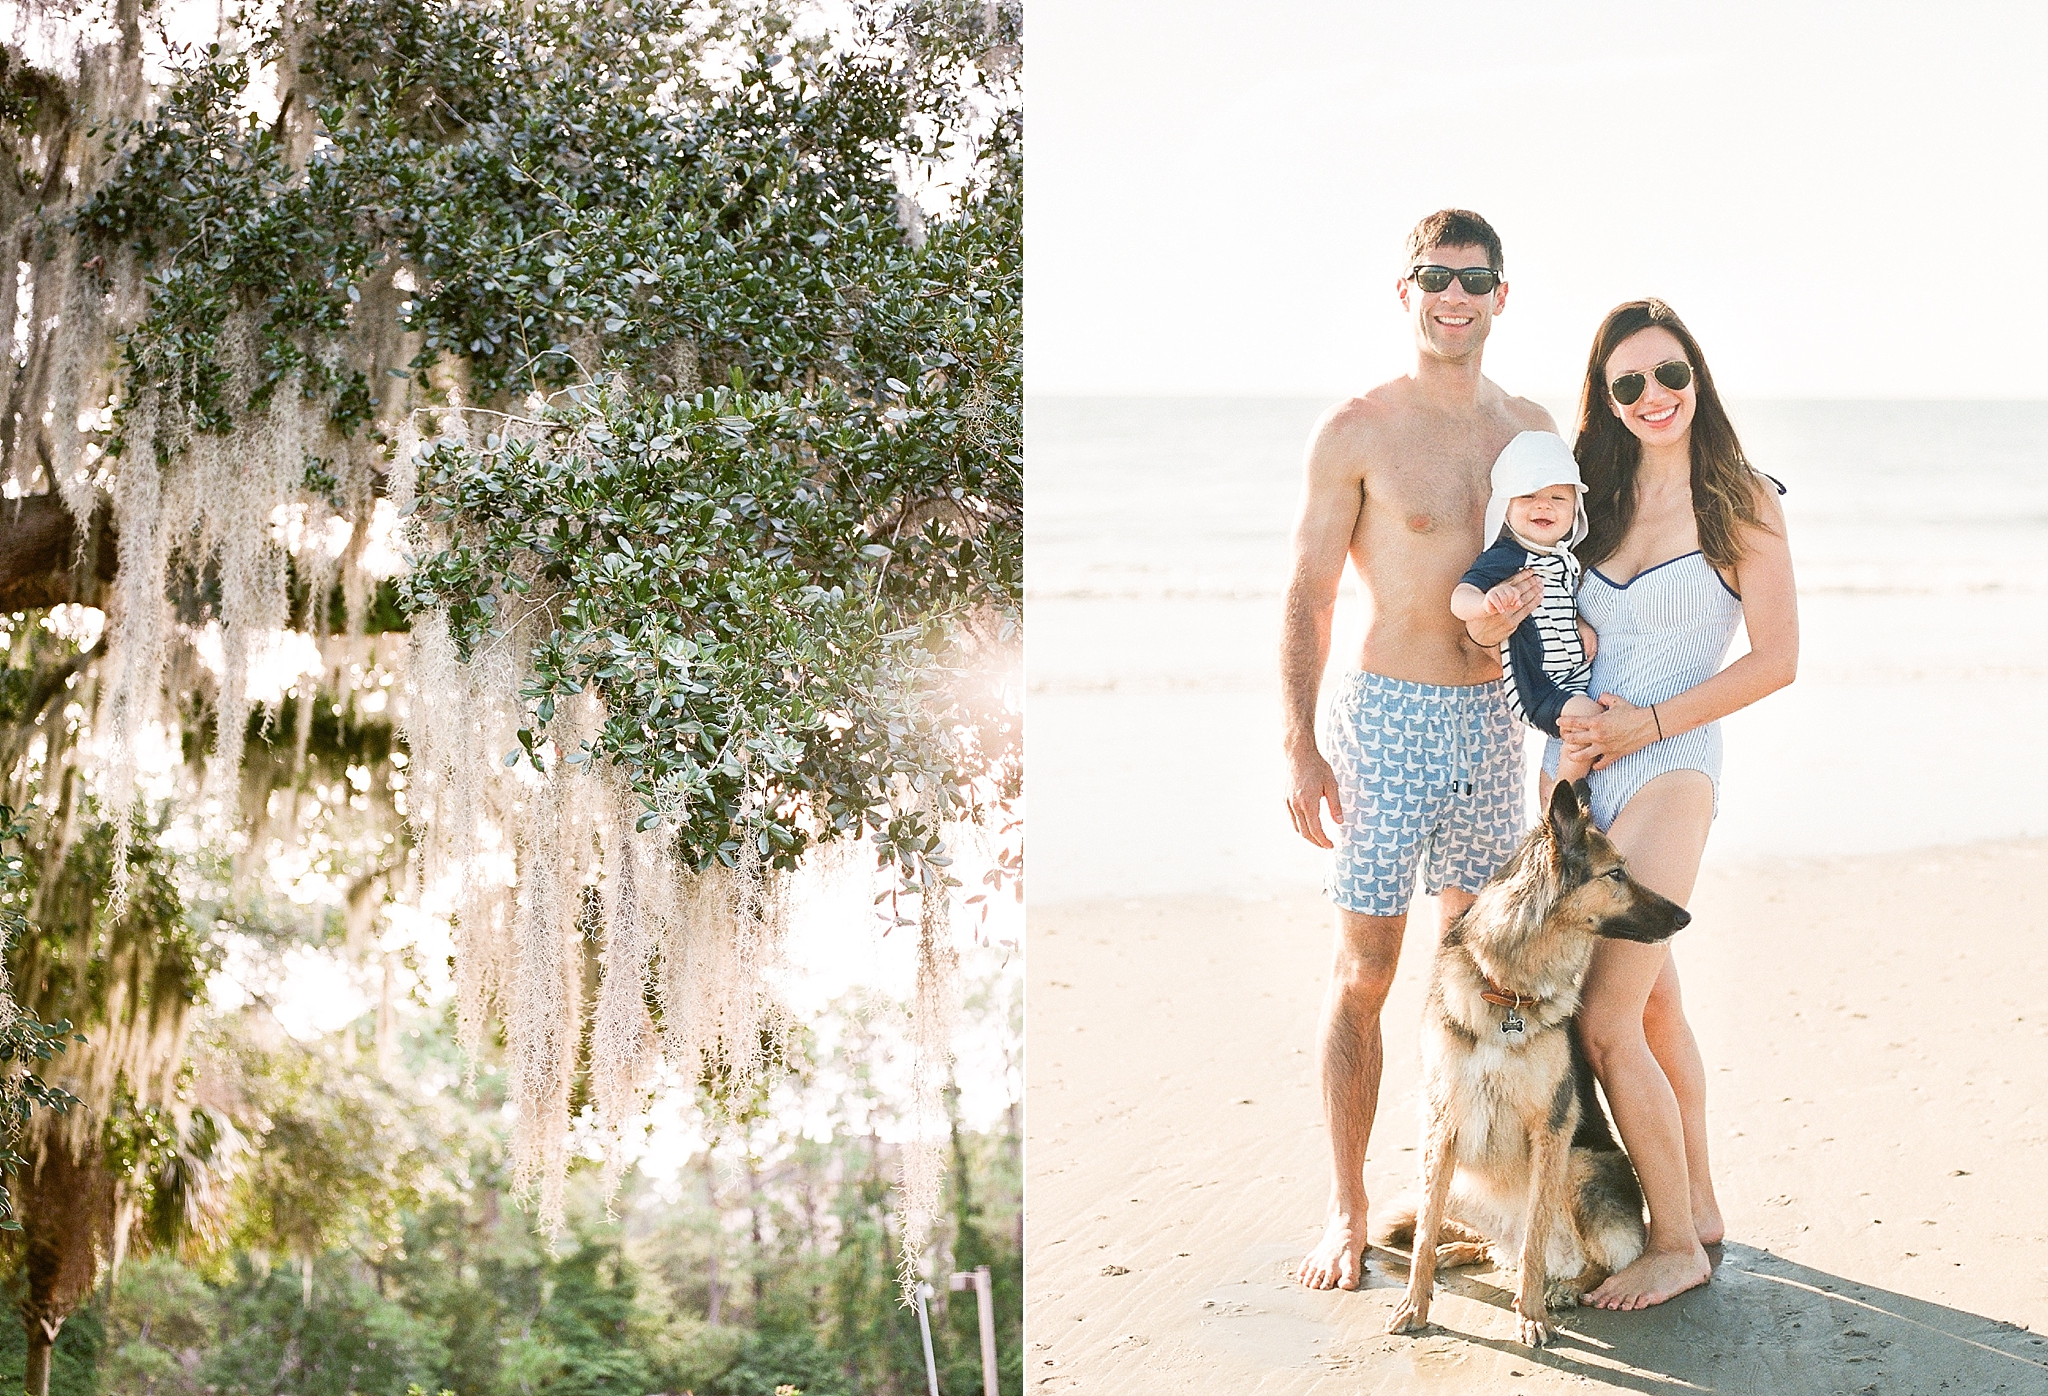 A quick peek into our summer getaway to the stunning beaches of Hilton Head Island in South Carolina.